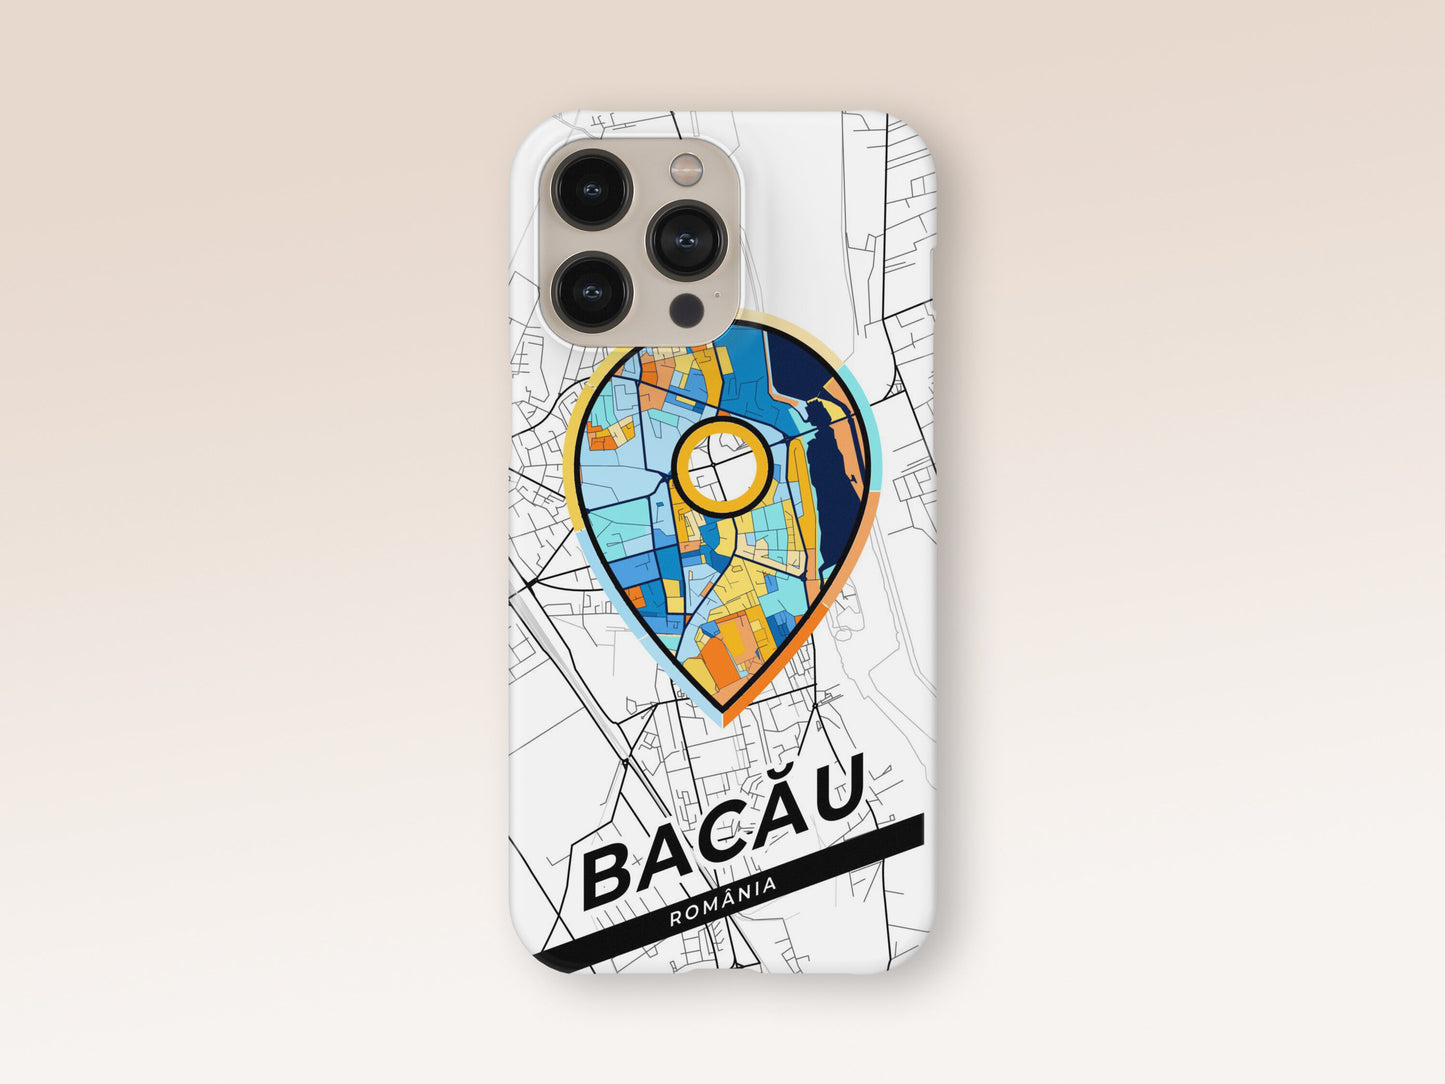 Bacău Romania slim phone case with colorful icon. Birthday, wedding or housewarming gift. Couple match cases. 1